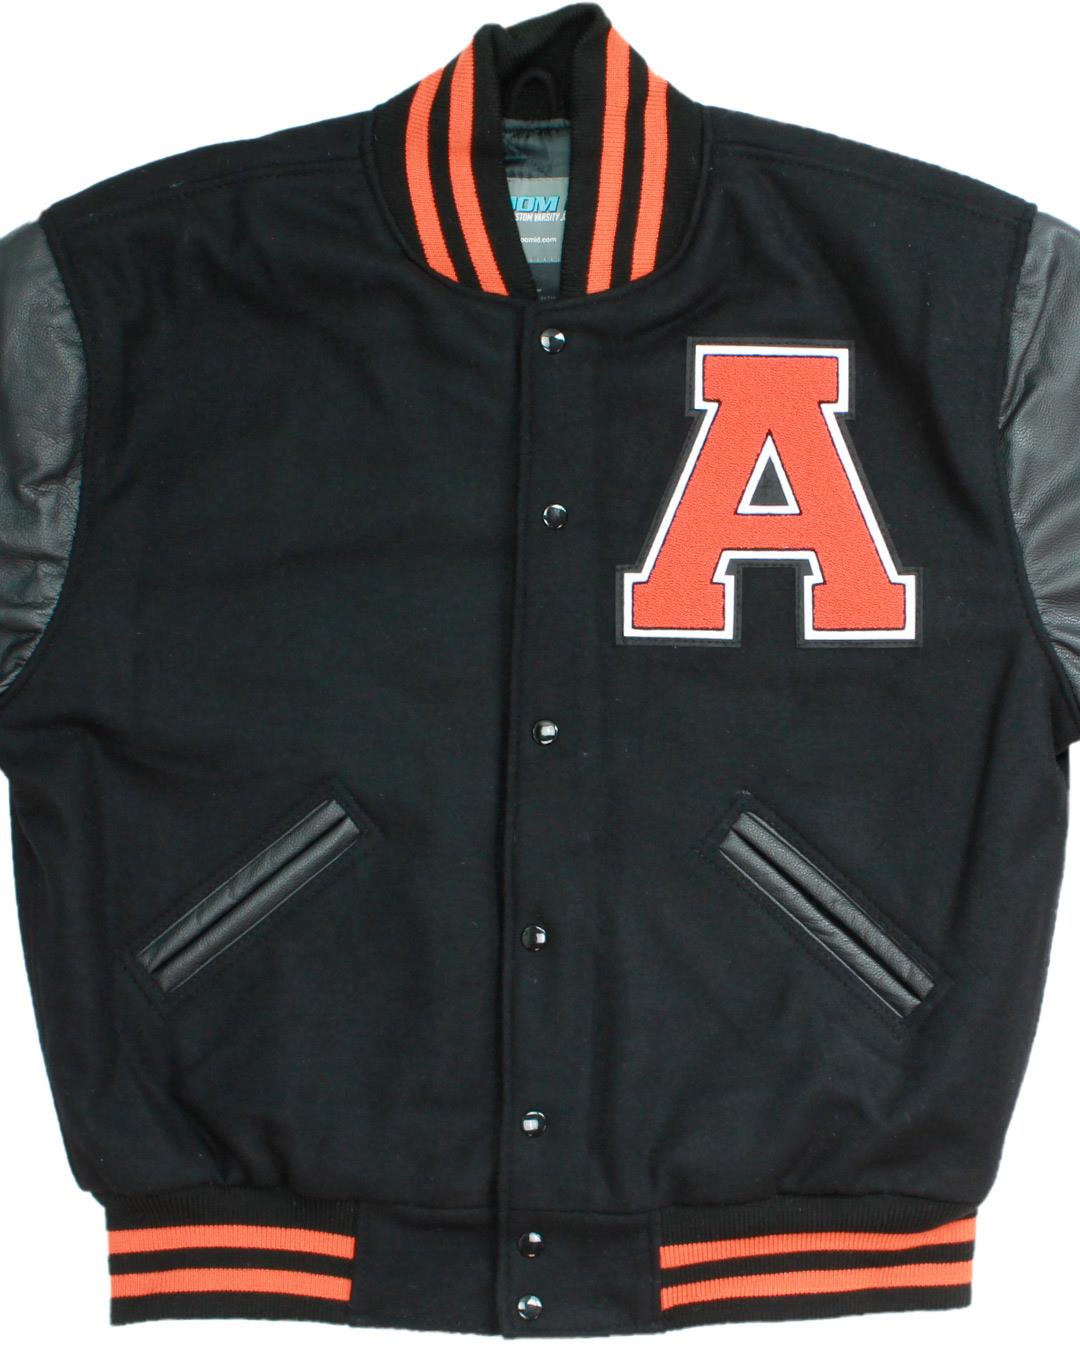 Akron High School Tigers Letterman Jacket, Akron, NY - Front